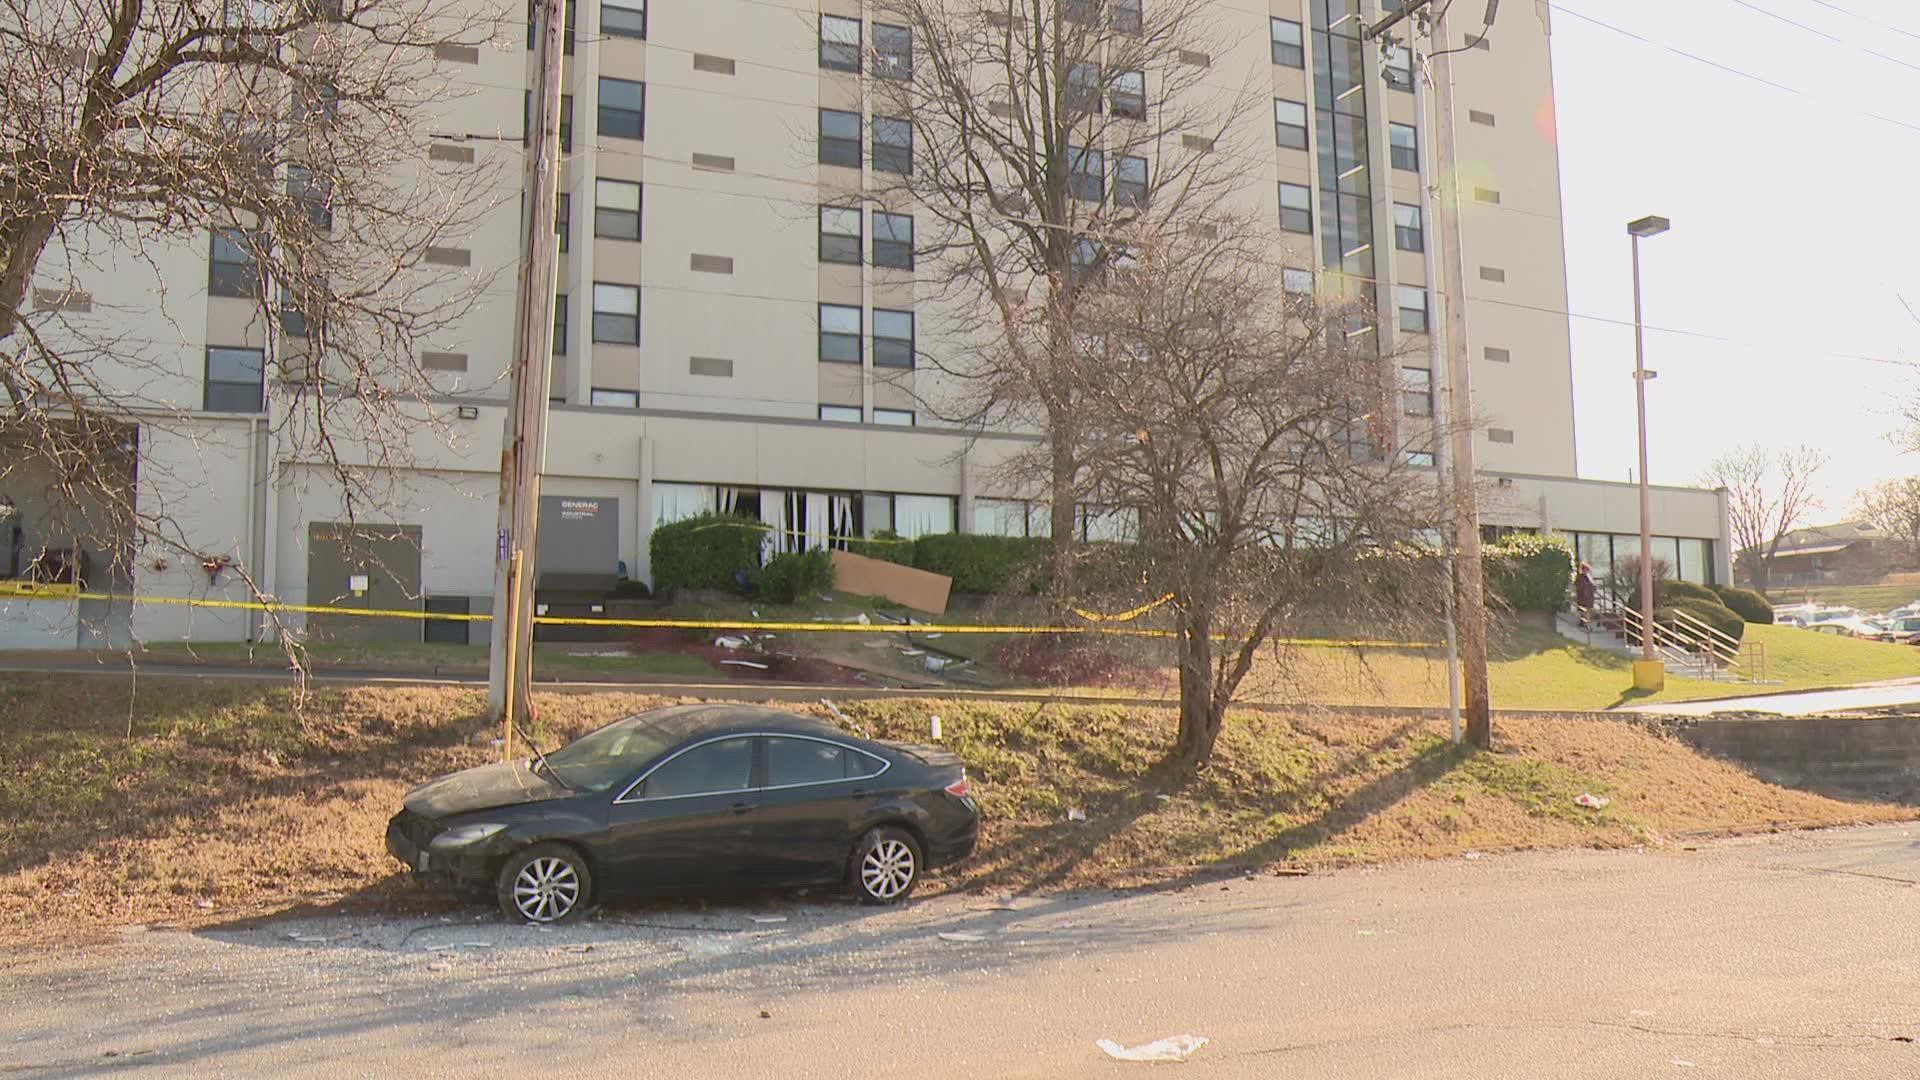 The crash happened at a complex in the 4600 block of Ridgewood Avenue at around 10:45 a.m. Police said one of the people hurt in the crash died at an area hospital.